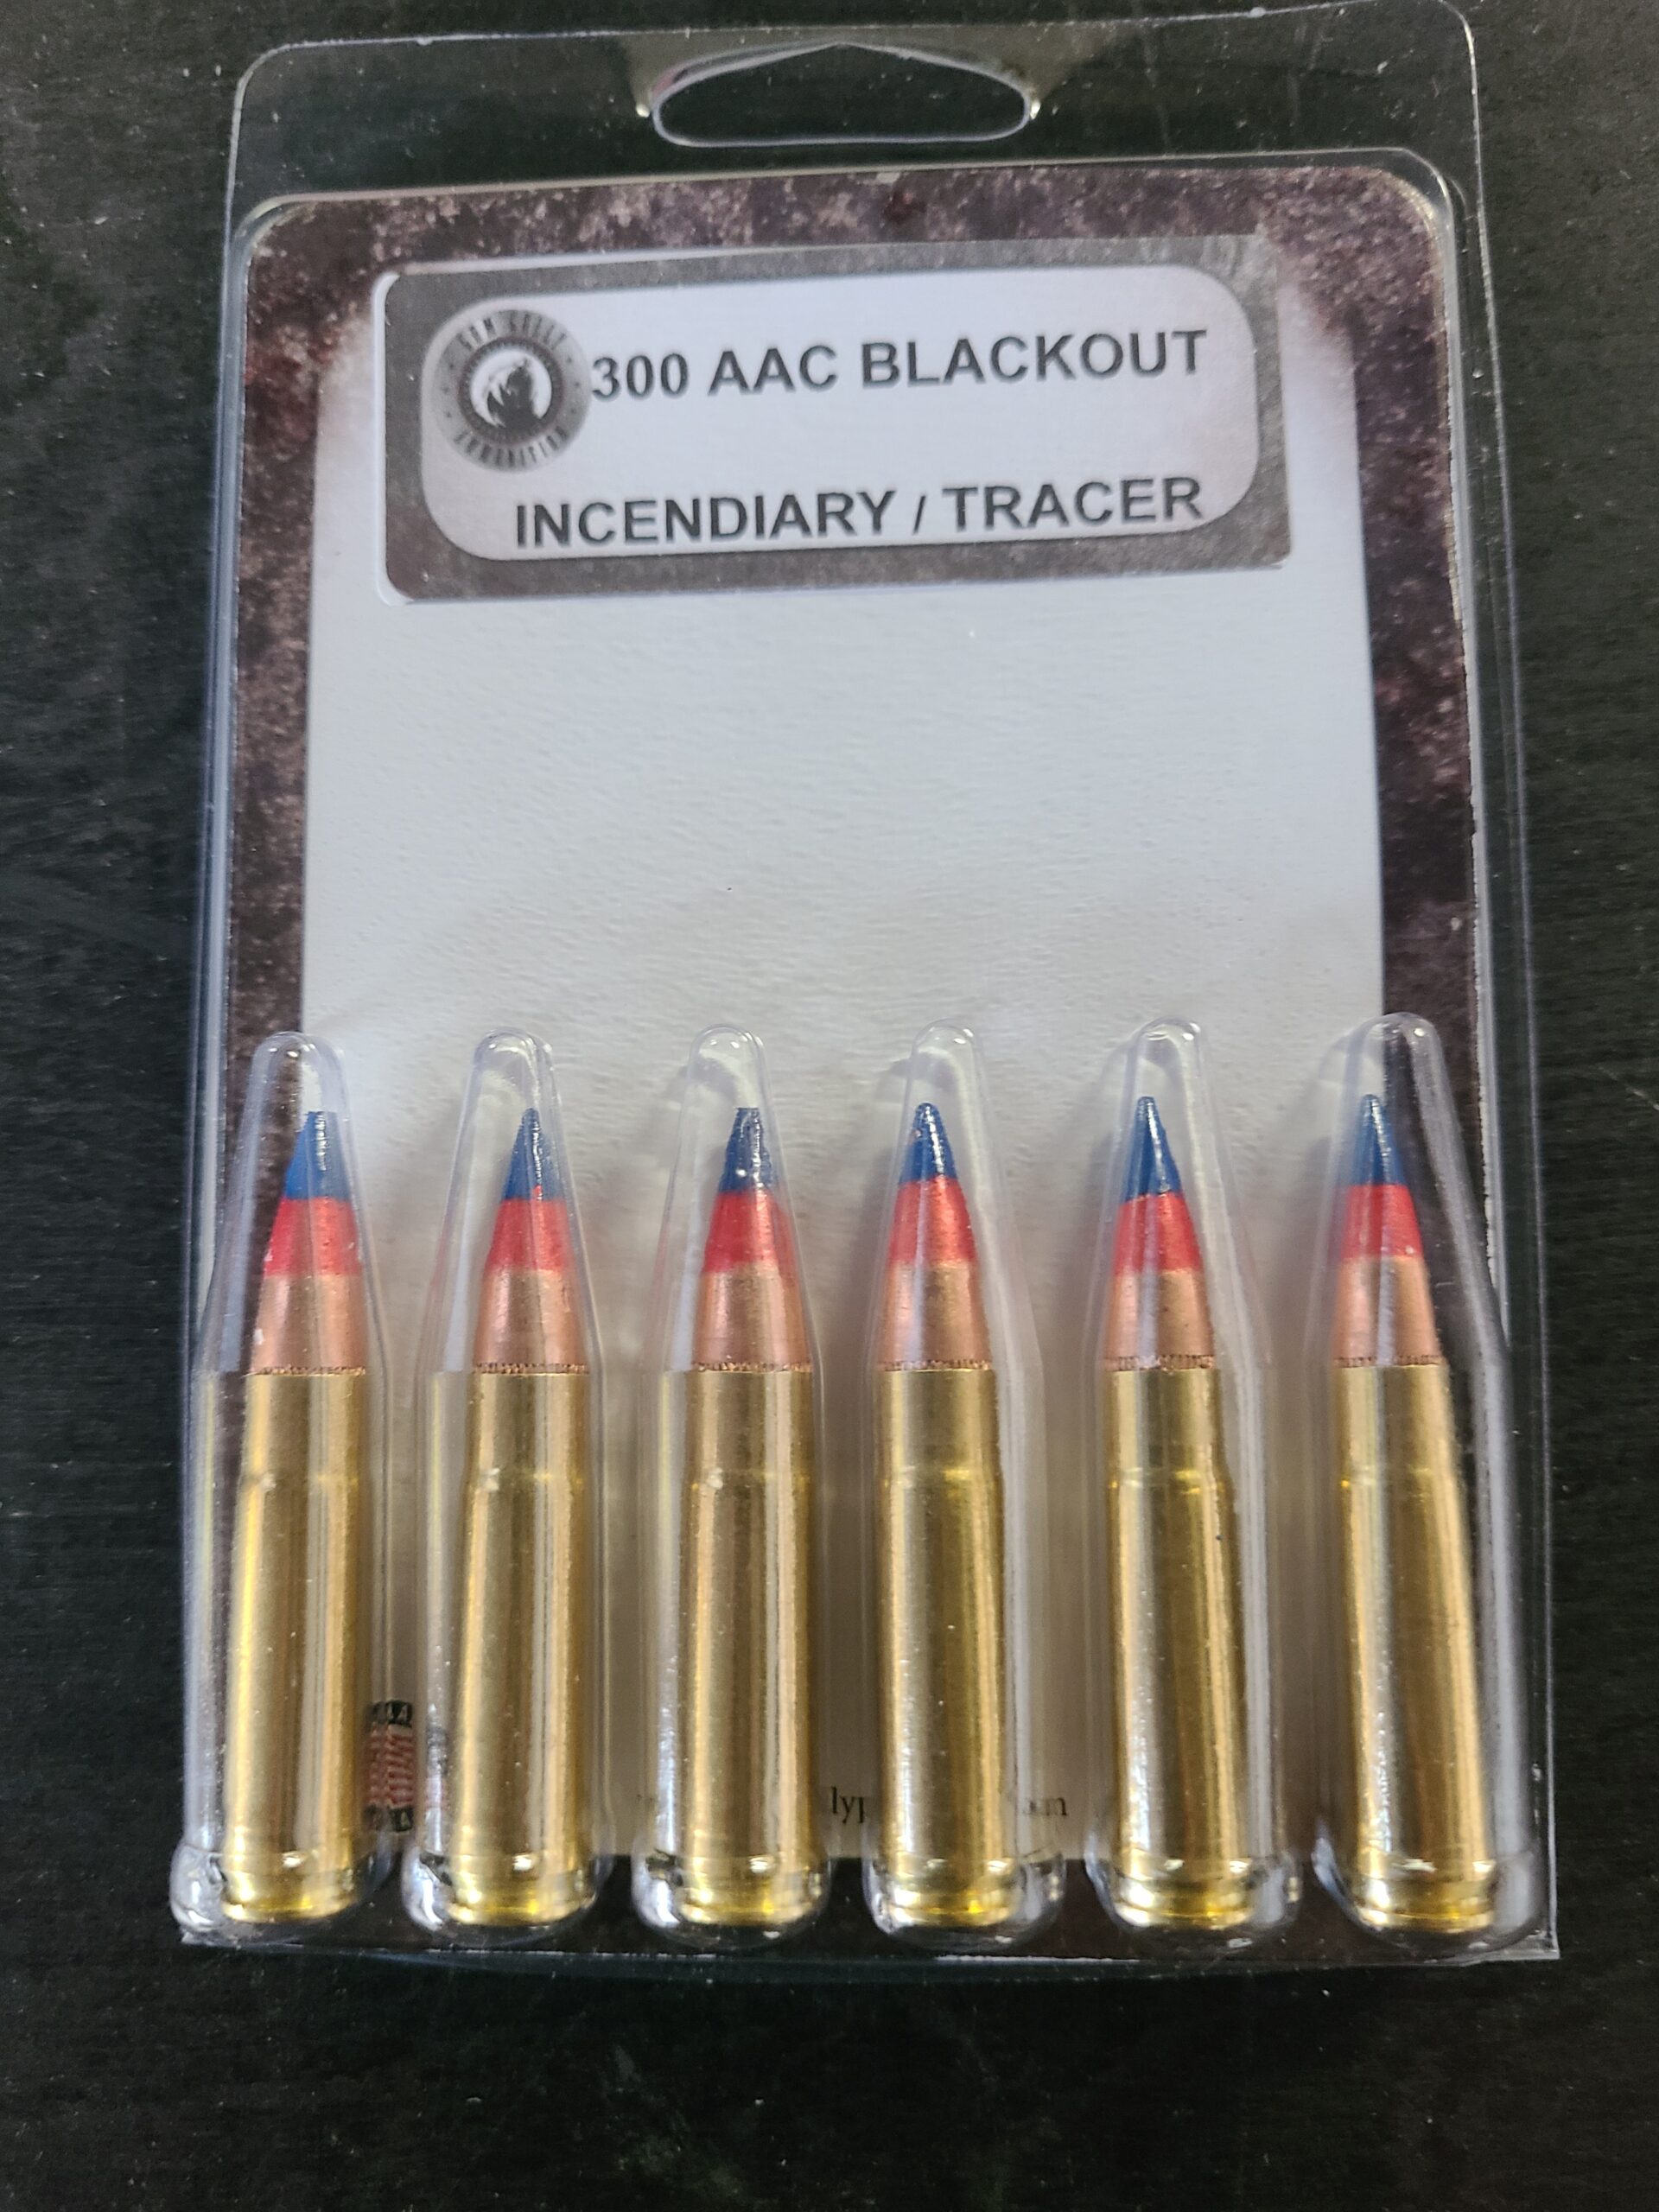 300 AAC Blackout Incendiary Tracer 6 rounds